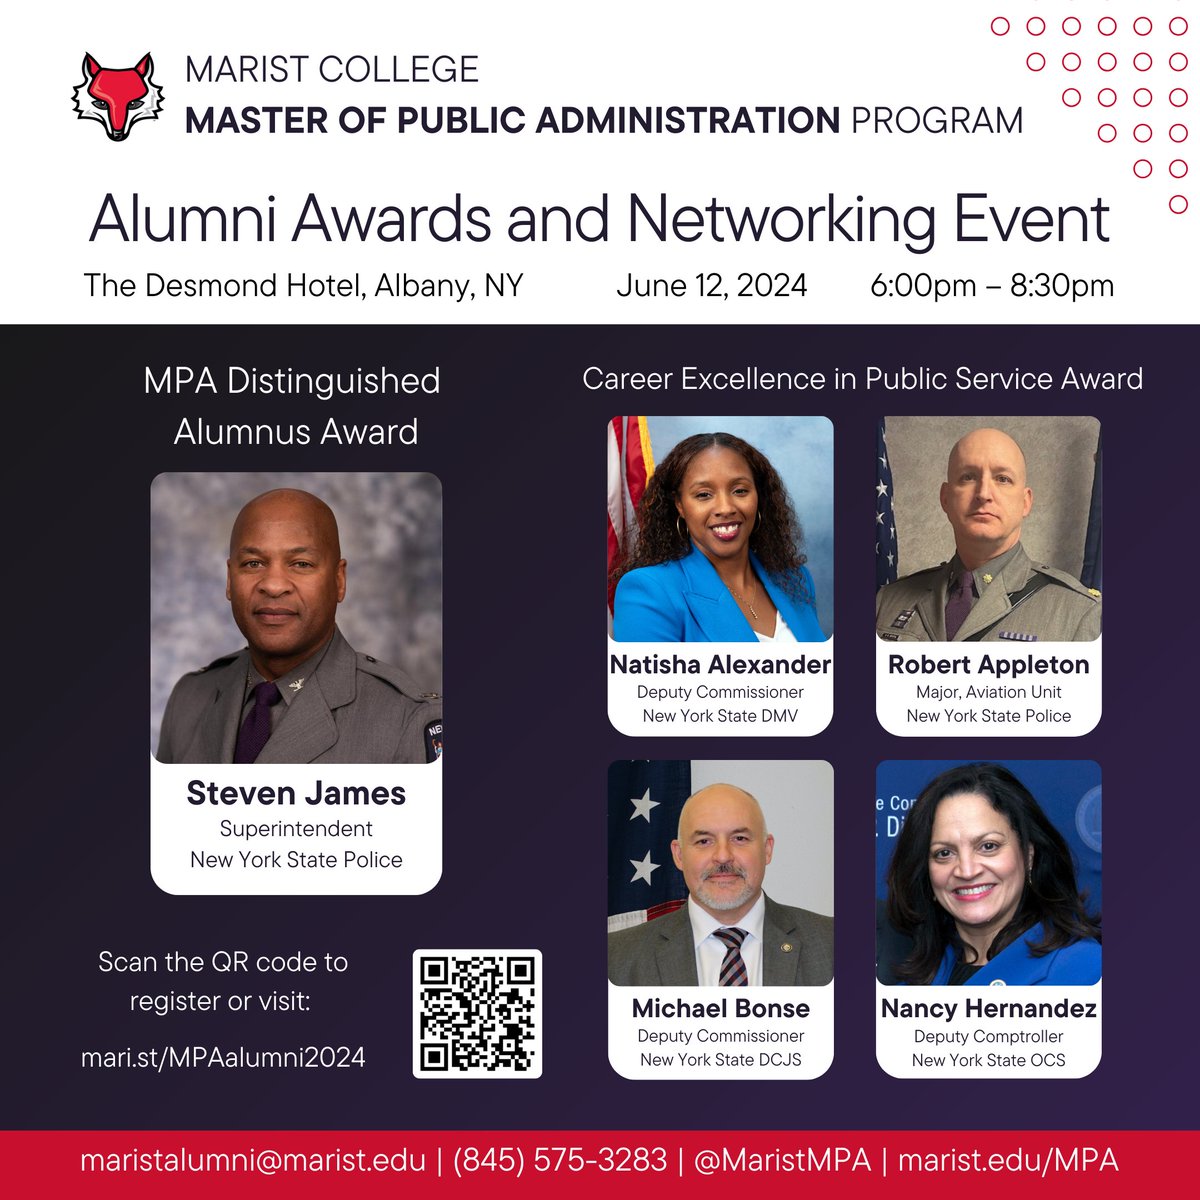 The Marist MPA program is proud to celebrate five of our distinguished alumni on June 12th at The Desmond Hotel, Albany, NY, from 6:00pm to 8:30pm To register: mari.st/MPAalumni2024 @Marist @nyspolice @NYSDCJS @nysdmv @NYSComptroller